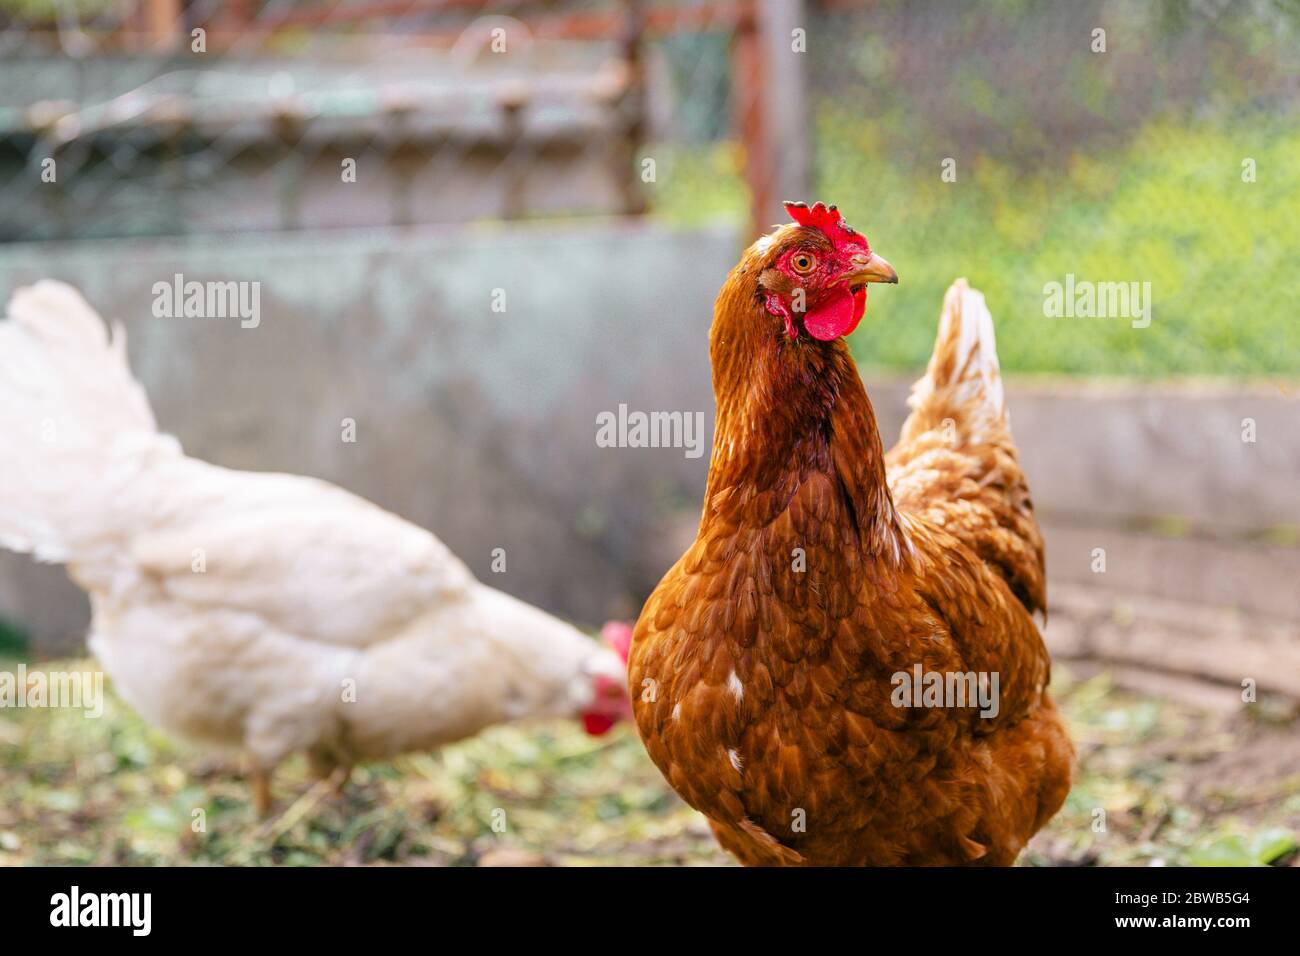 Chicken standing on a rural garden in the countryside. Close up of a chicken standing on a backyard shed with chicken coop. Free range birds Stock Photo